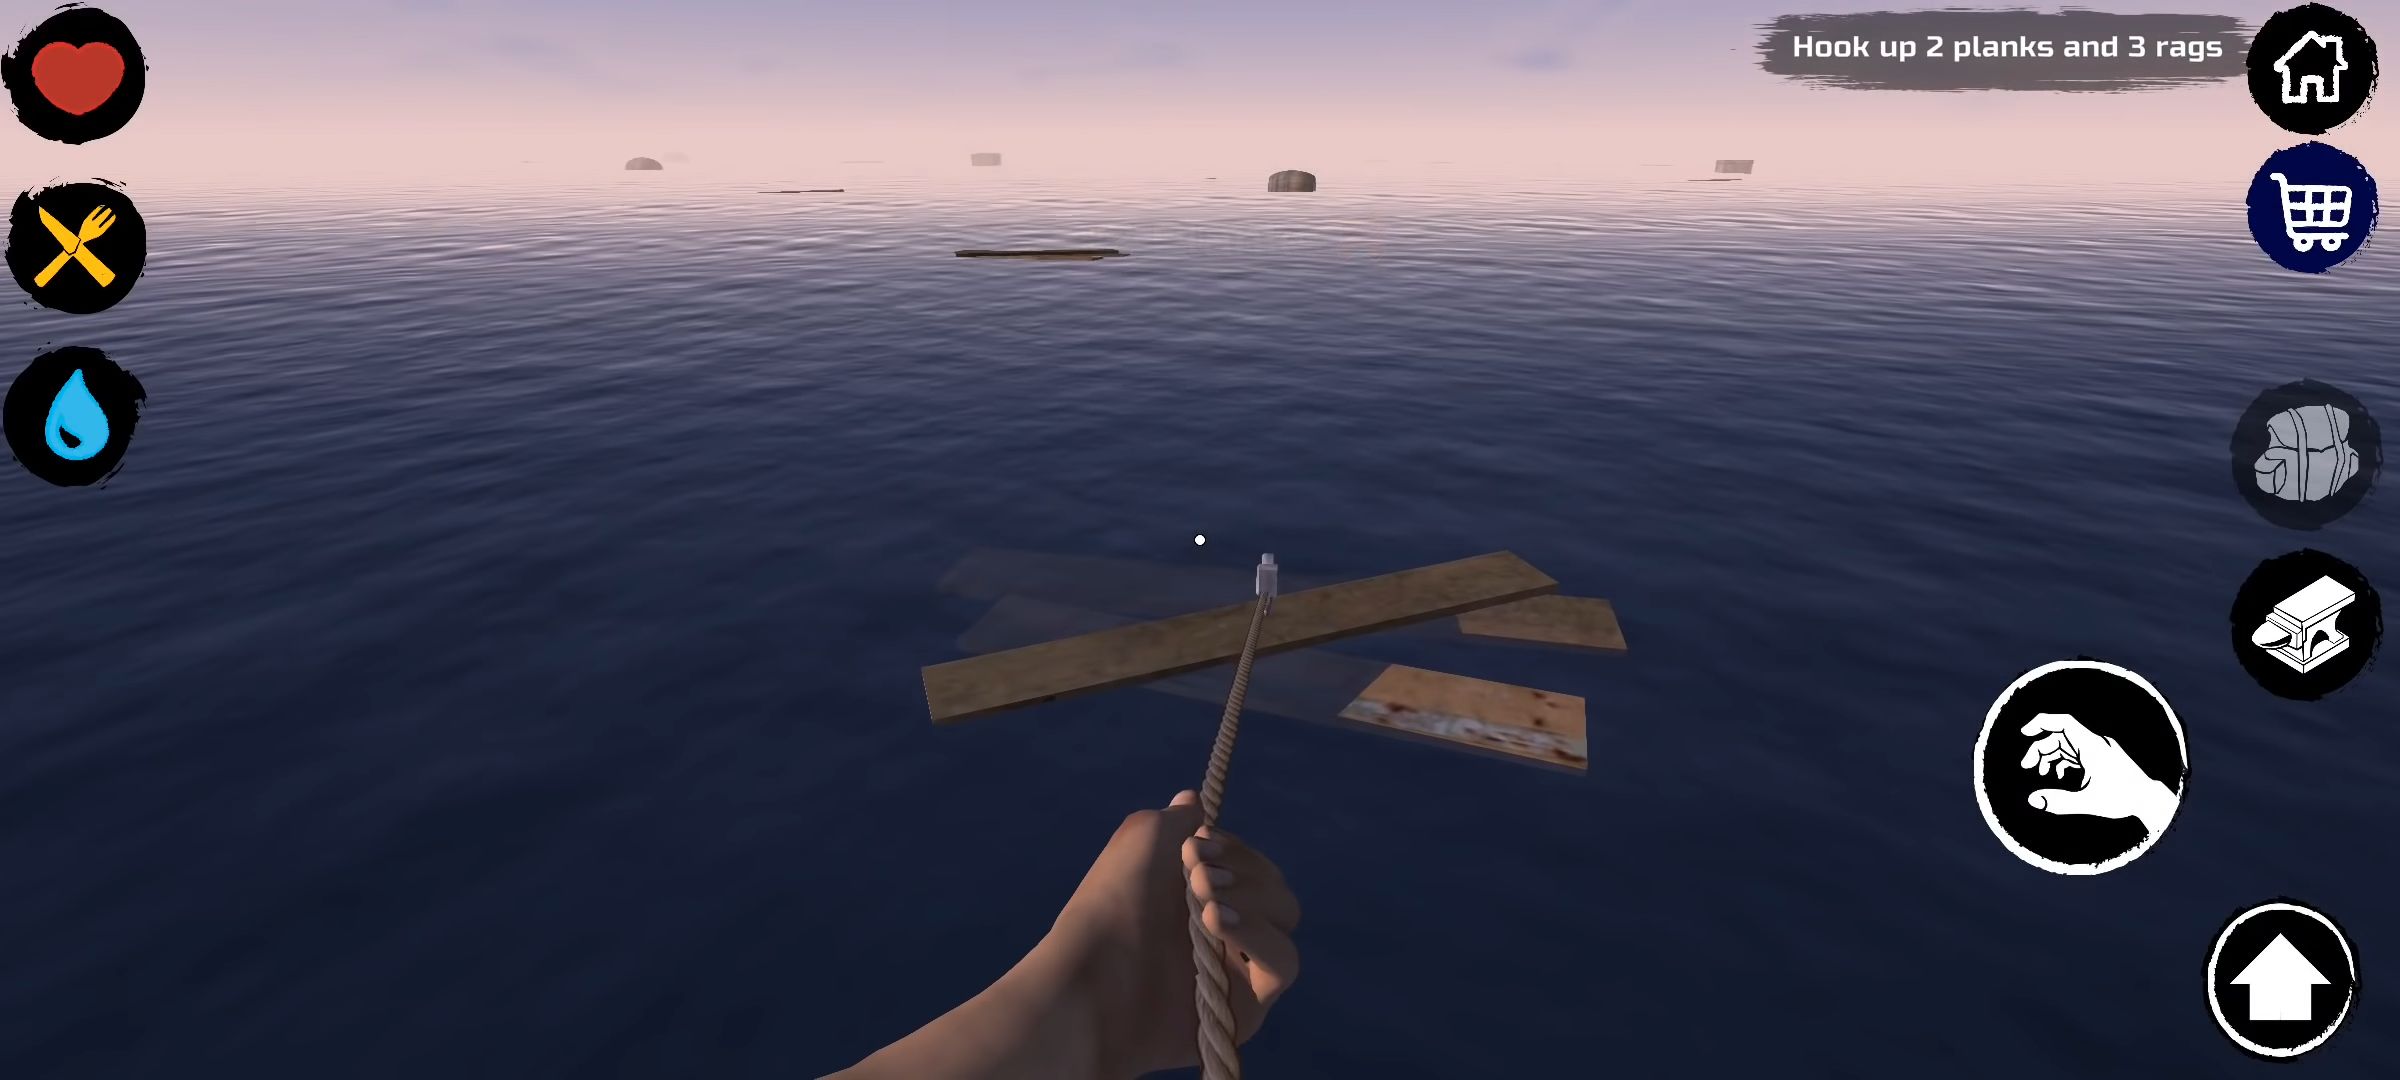 Baixar Survival and Craft: Crafting In The Ocean para Android grátis.